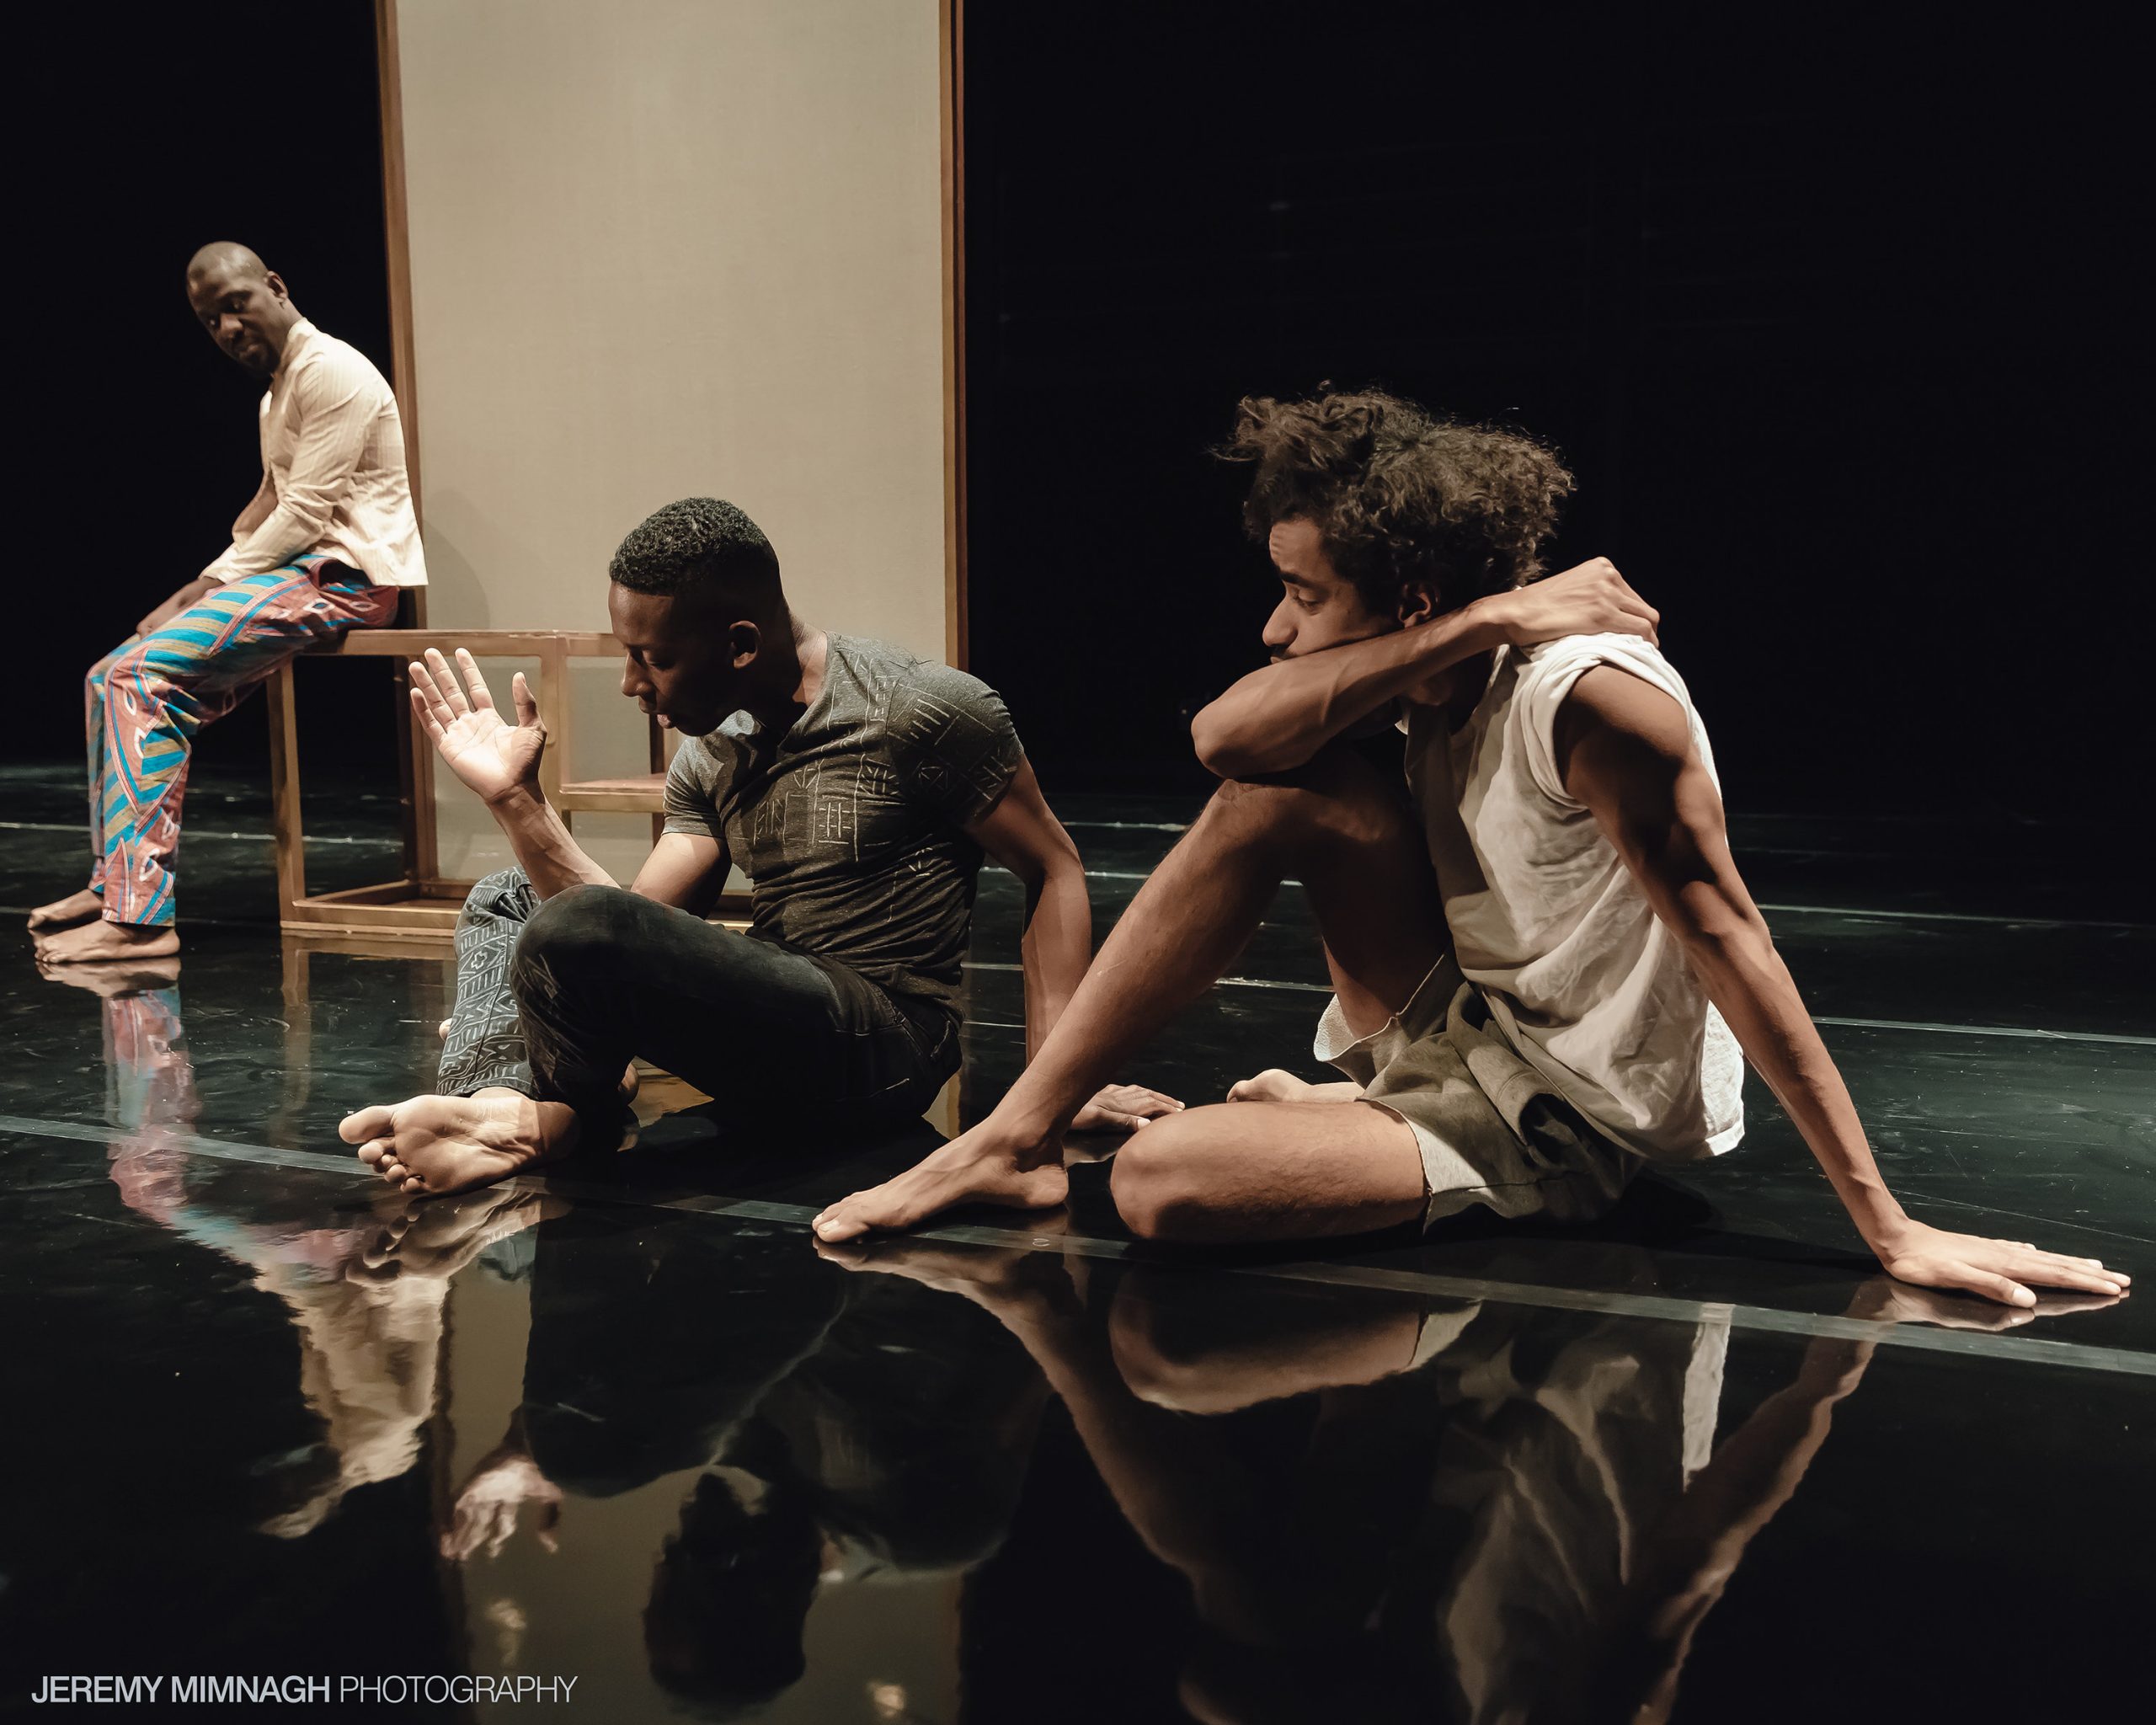 Tawiah Ben M'Carthy, Tjomas Olajide and Stephen Jackman-Torkoff on stage in Buddies' 2016 production of Black Boys.